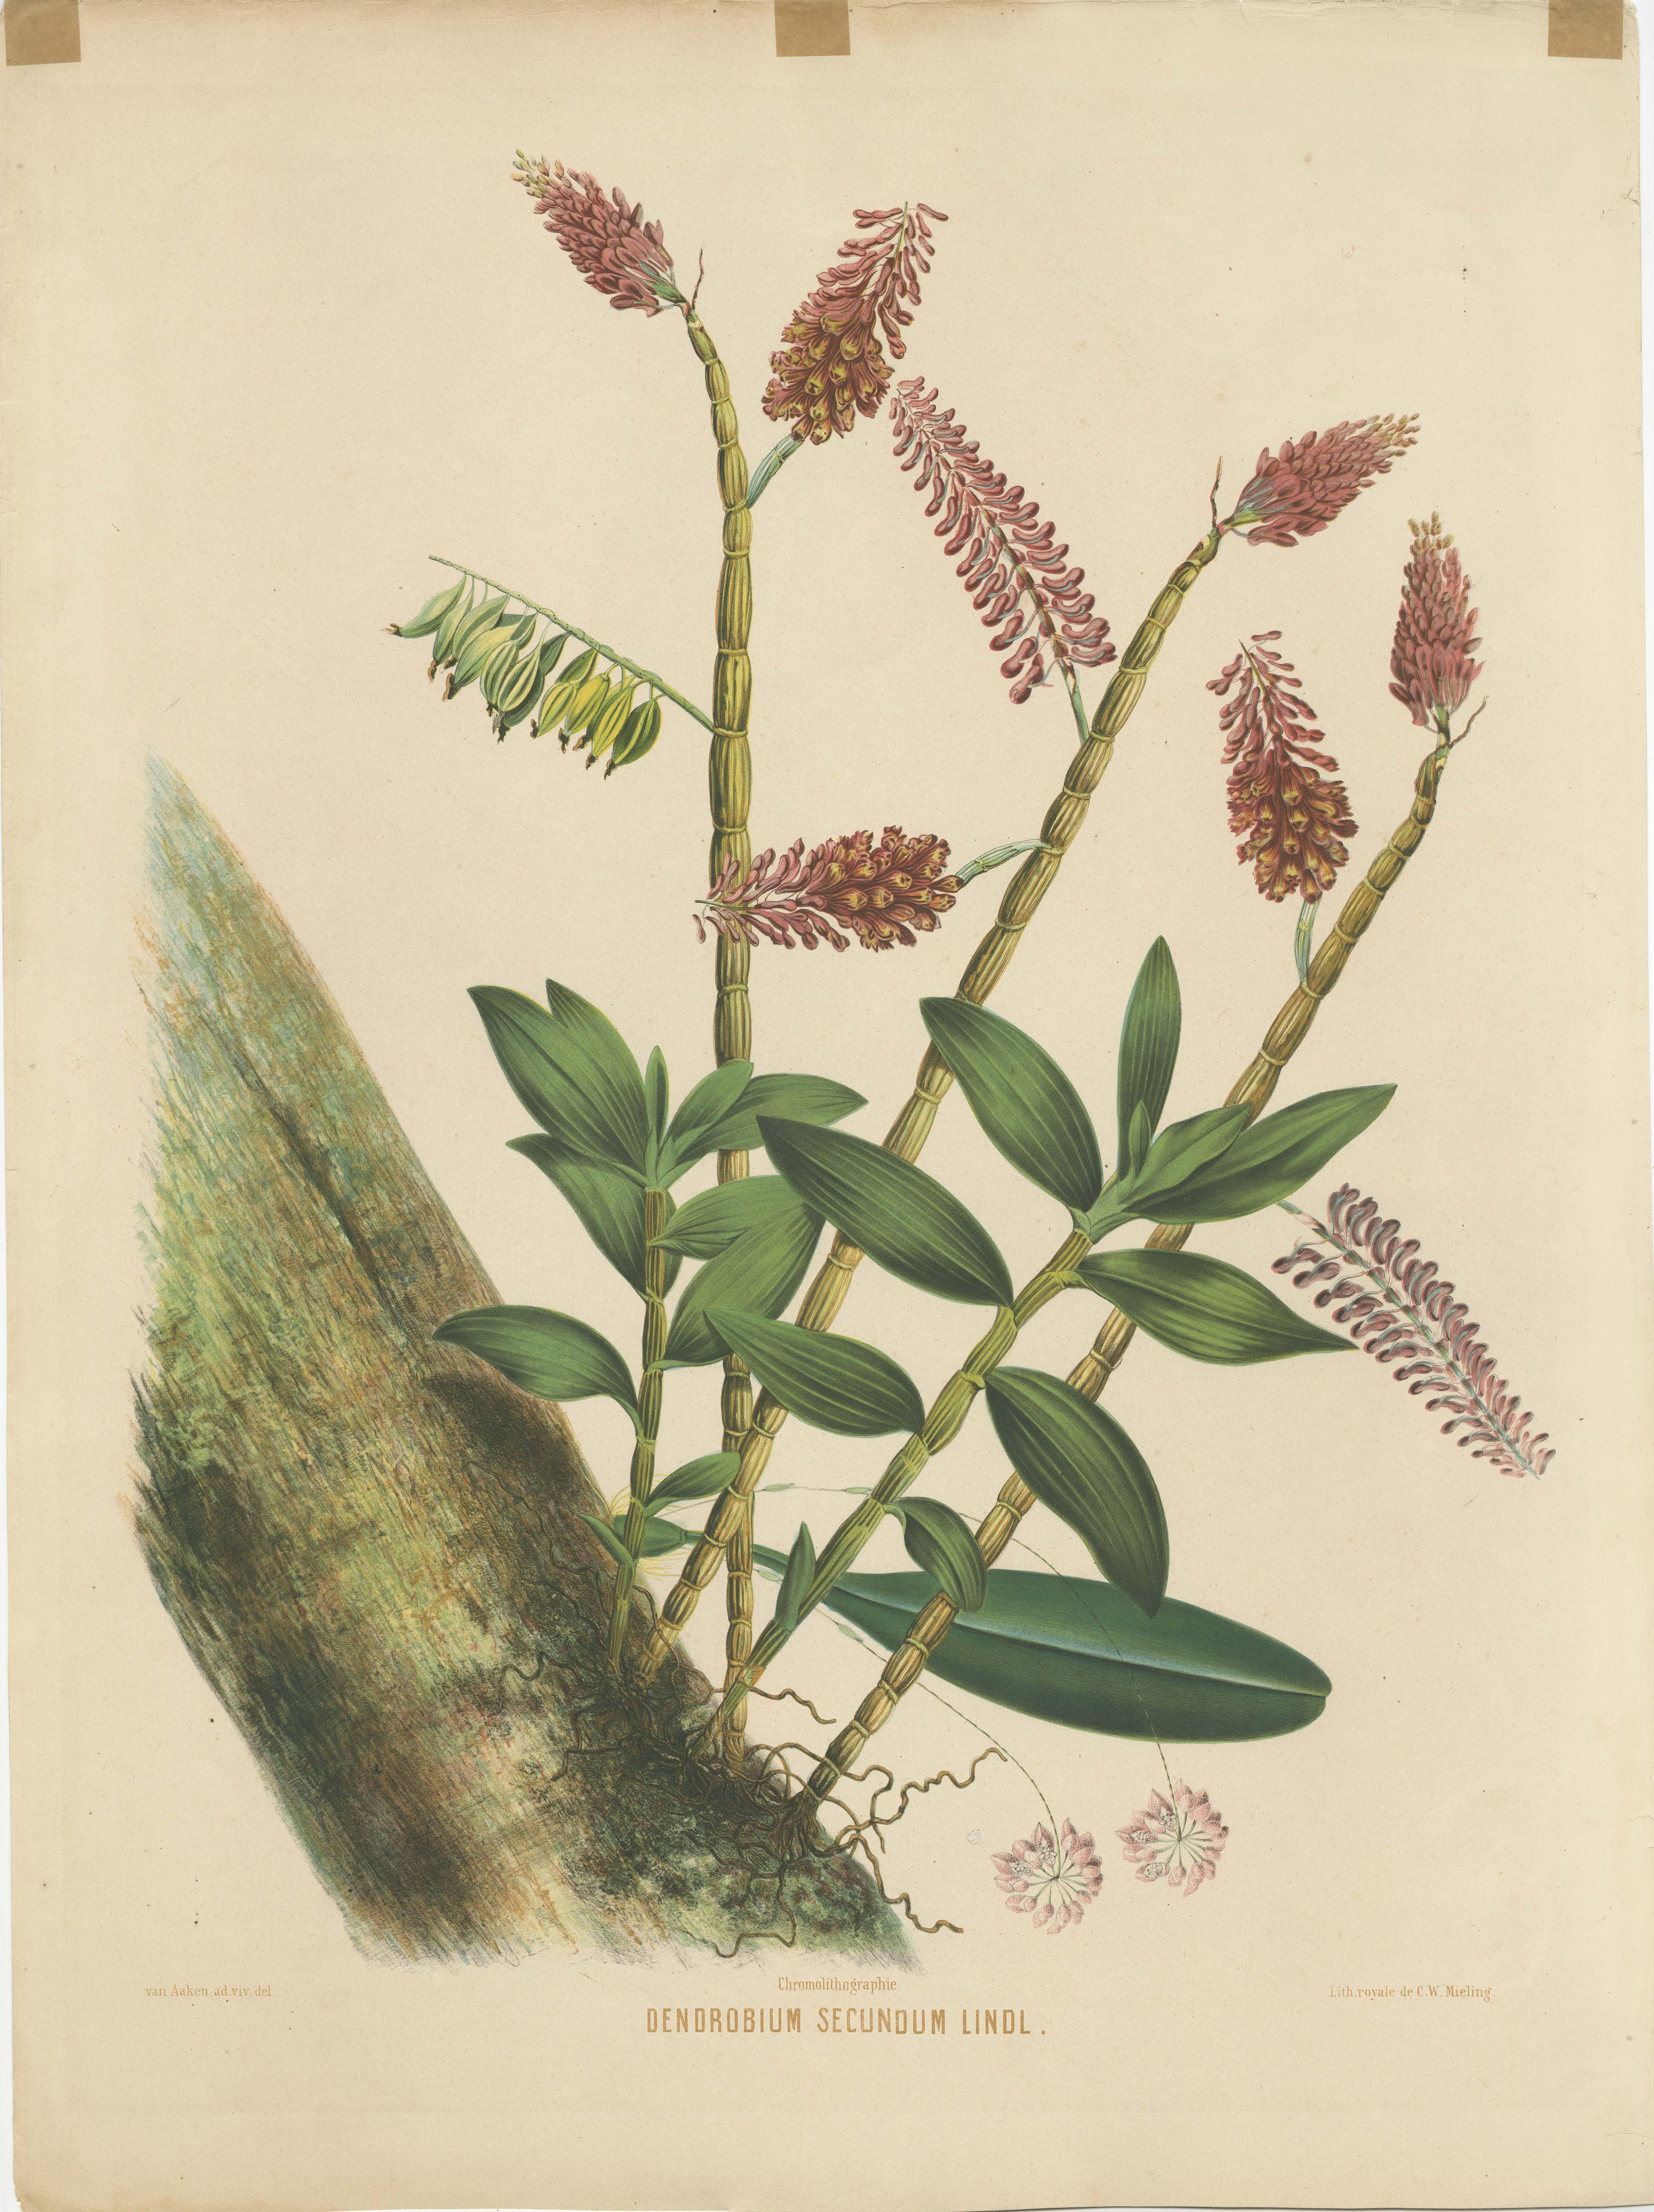 This is a large chromolithograph botanical print depicting the orchid species Dendrobium secundum Lindl. It is from the 19th-century publication 